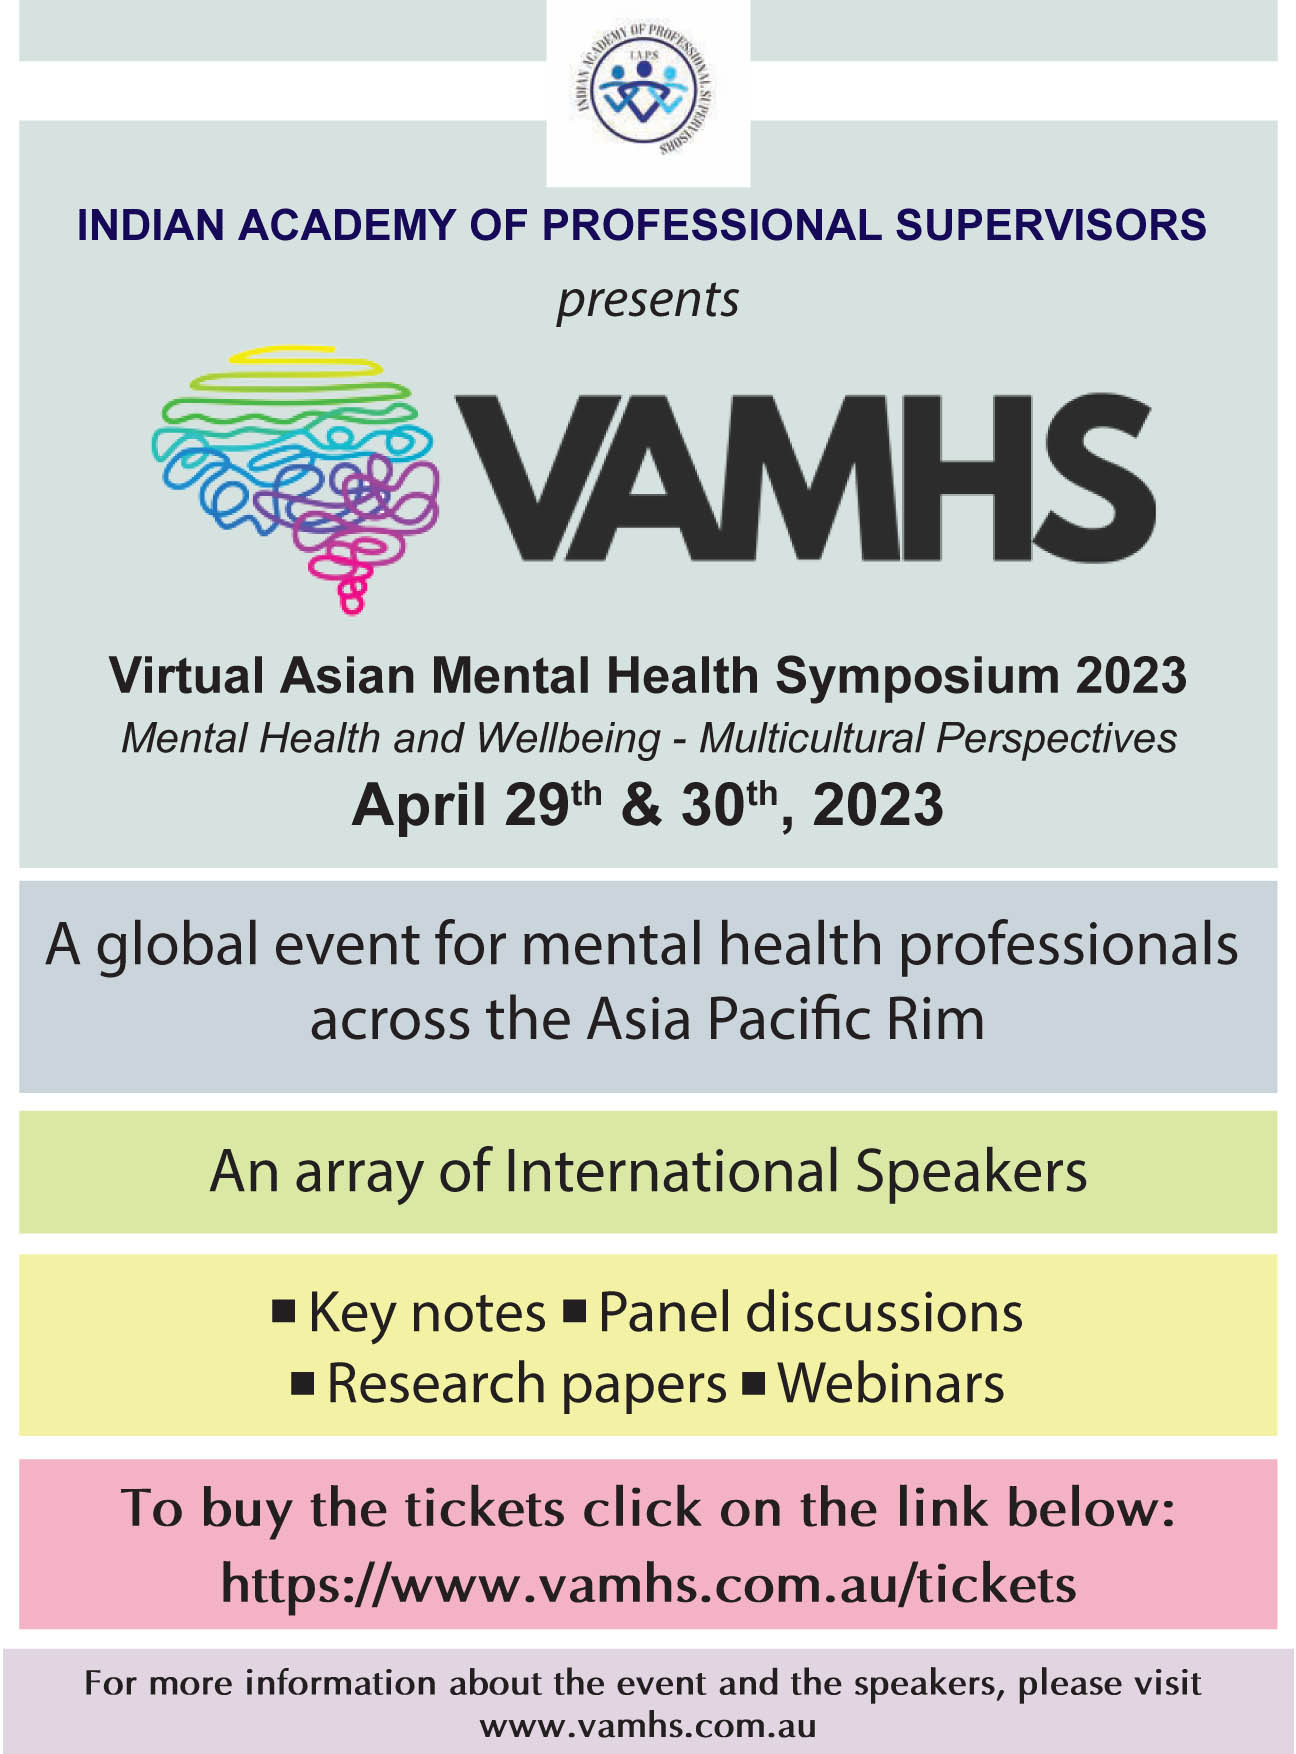 Registration link for upcoming Virtual Asian Mental Health Symposium being hosted by IAPS on 29th and 30 April, 2023